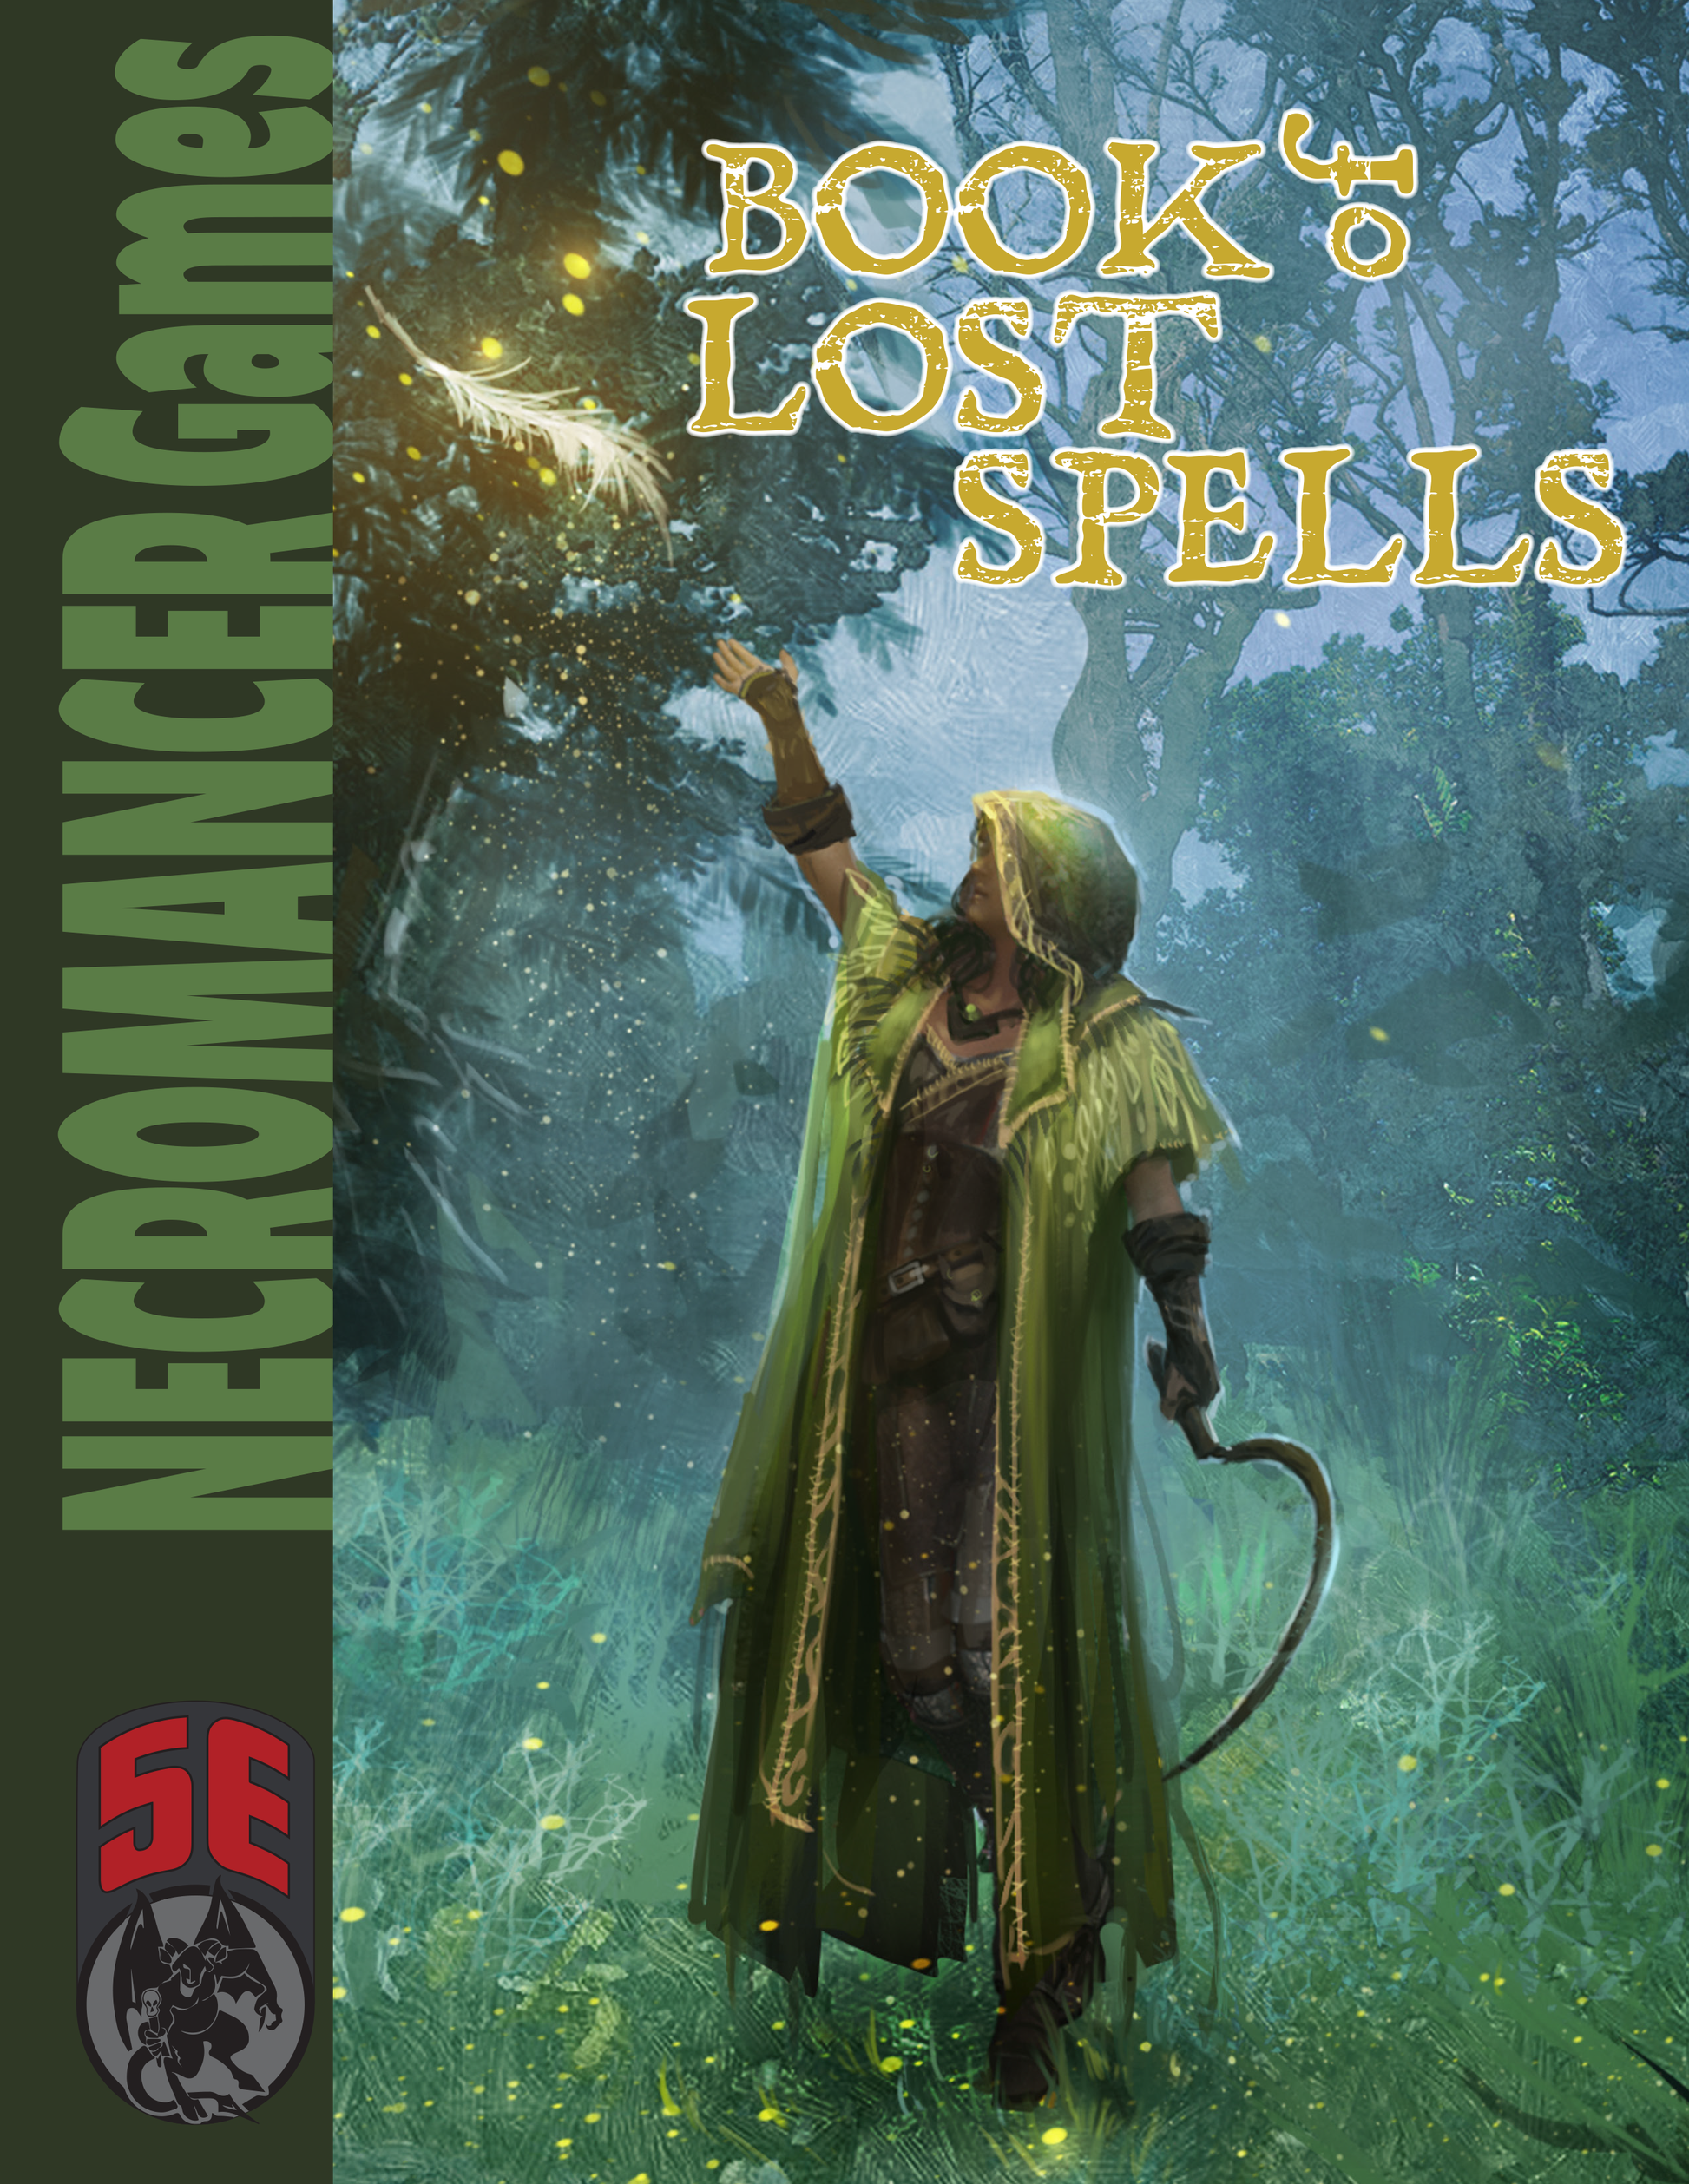 Cover from the Book of Lost Spells by Necromancer Games